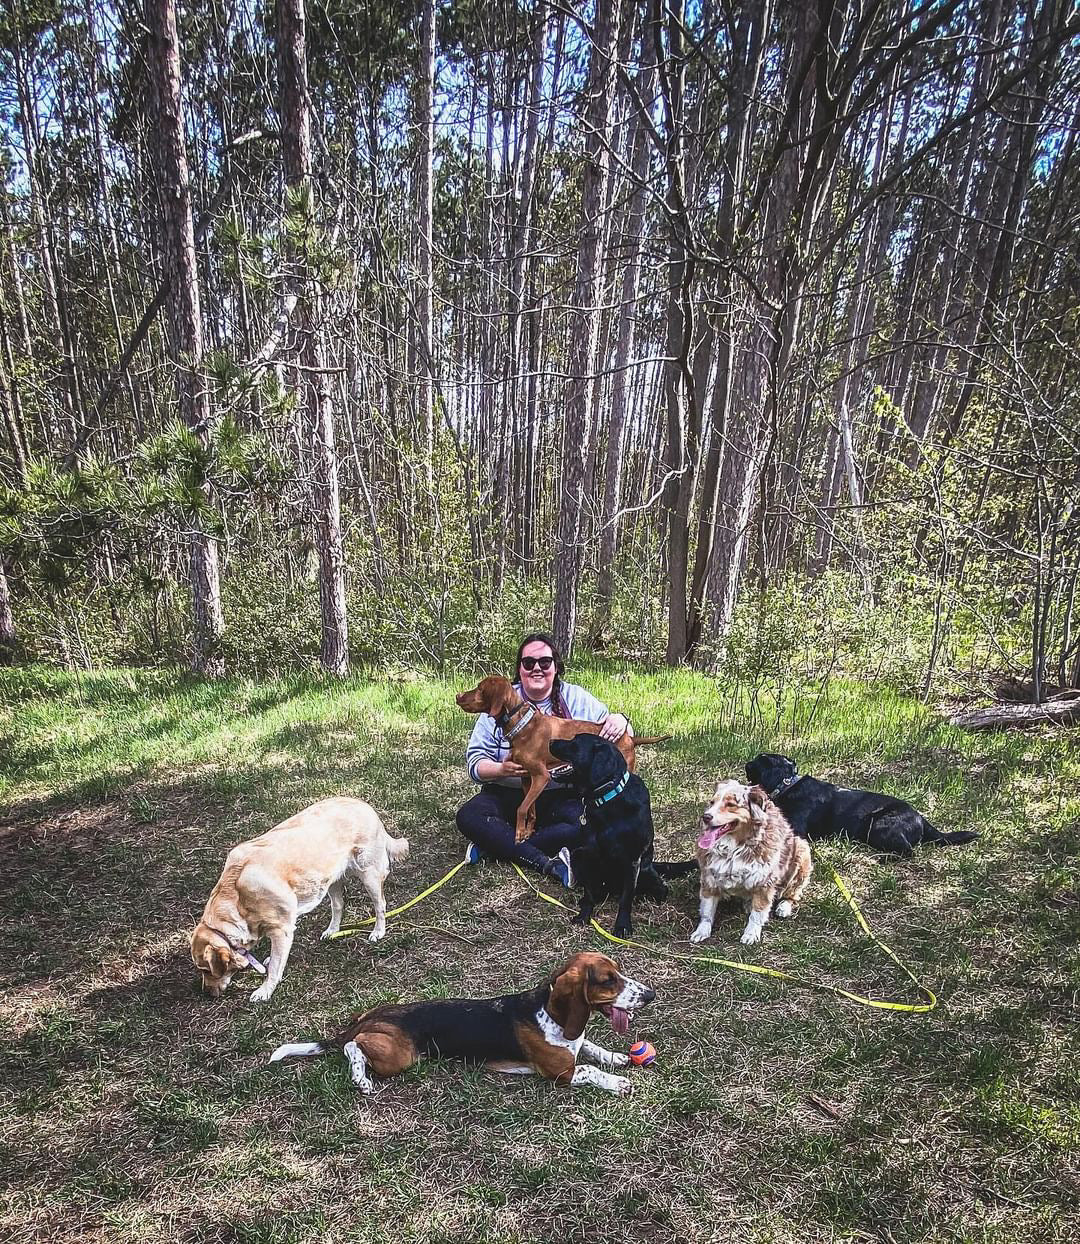 A dog walker sitting on a forest floor with 6 dogs around her. A red-coloured setter or retriever is sitting in her lap. The dog walker is smiling and wearing sunglasses.